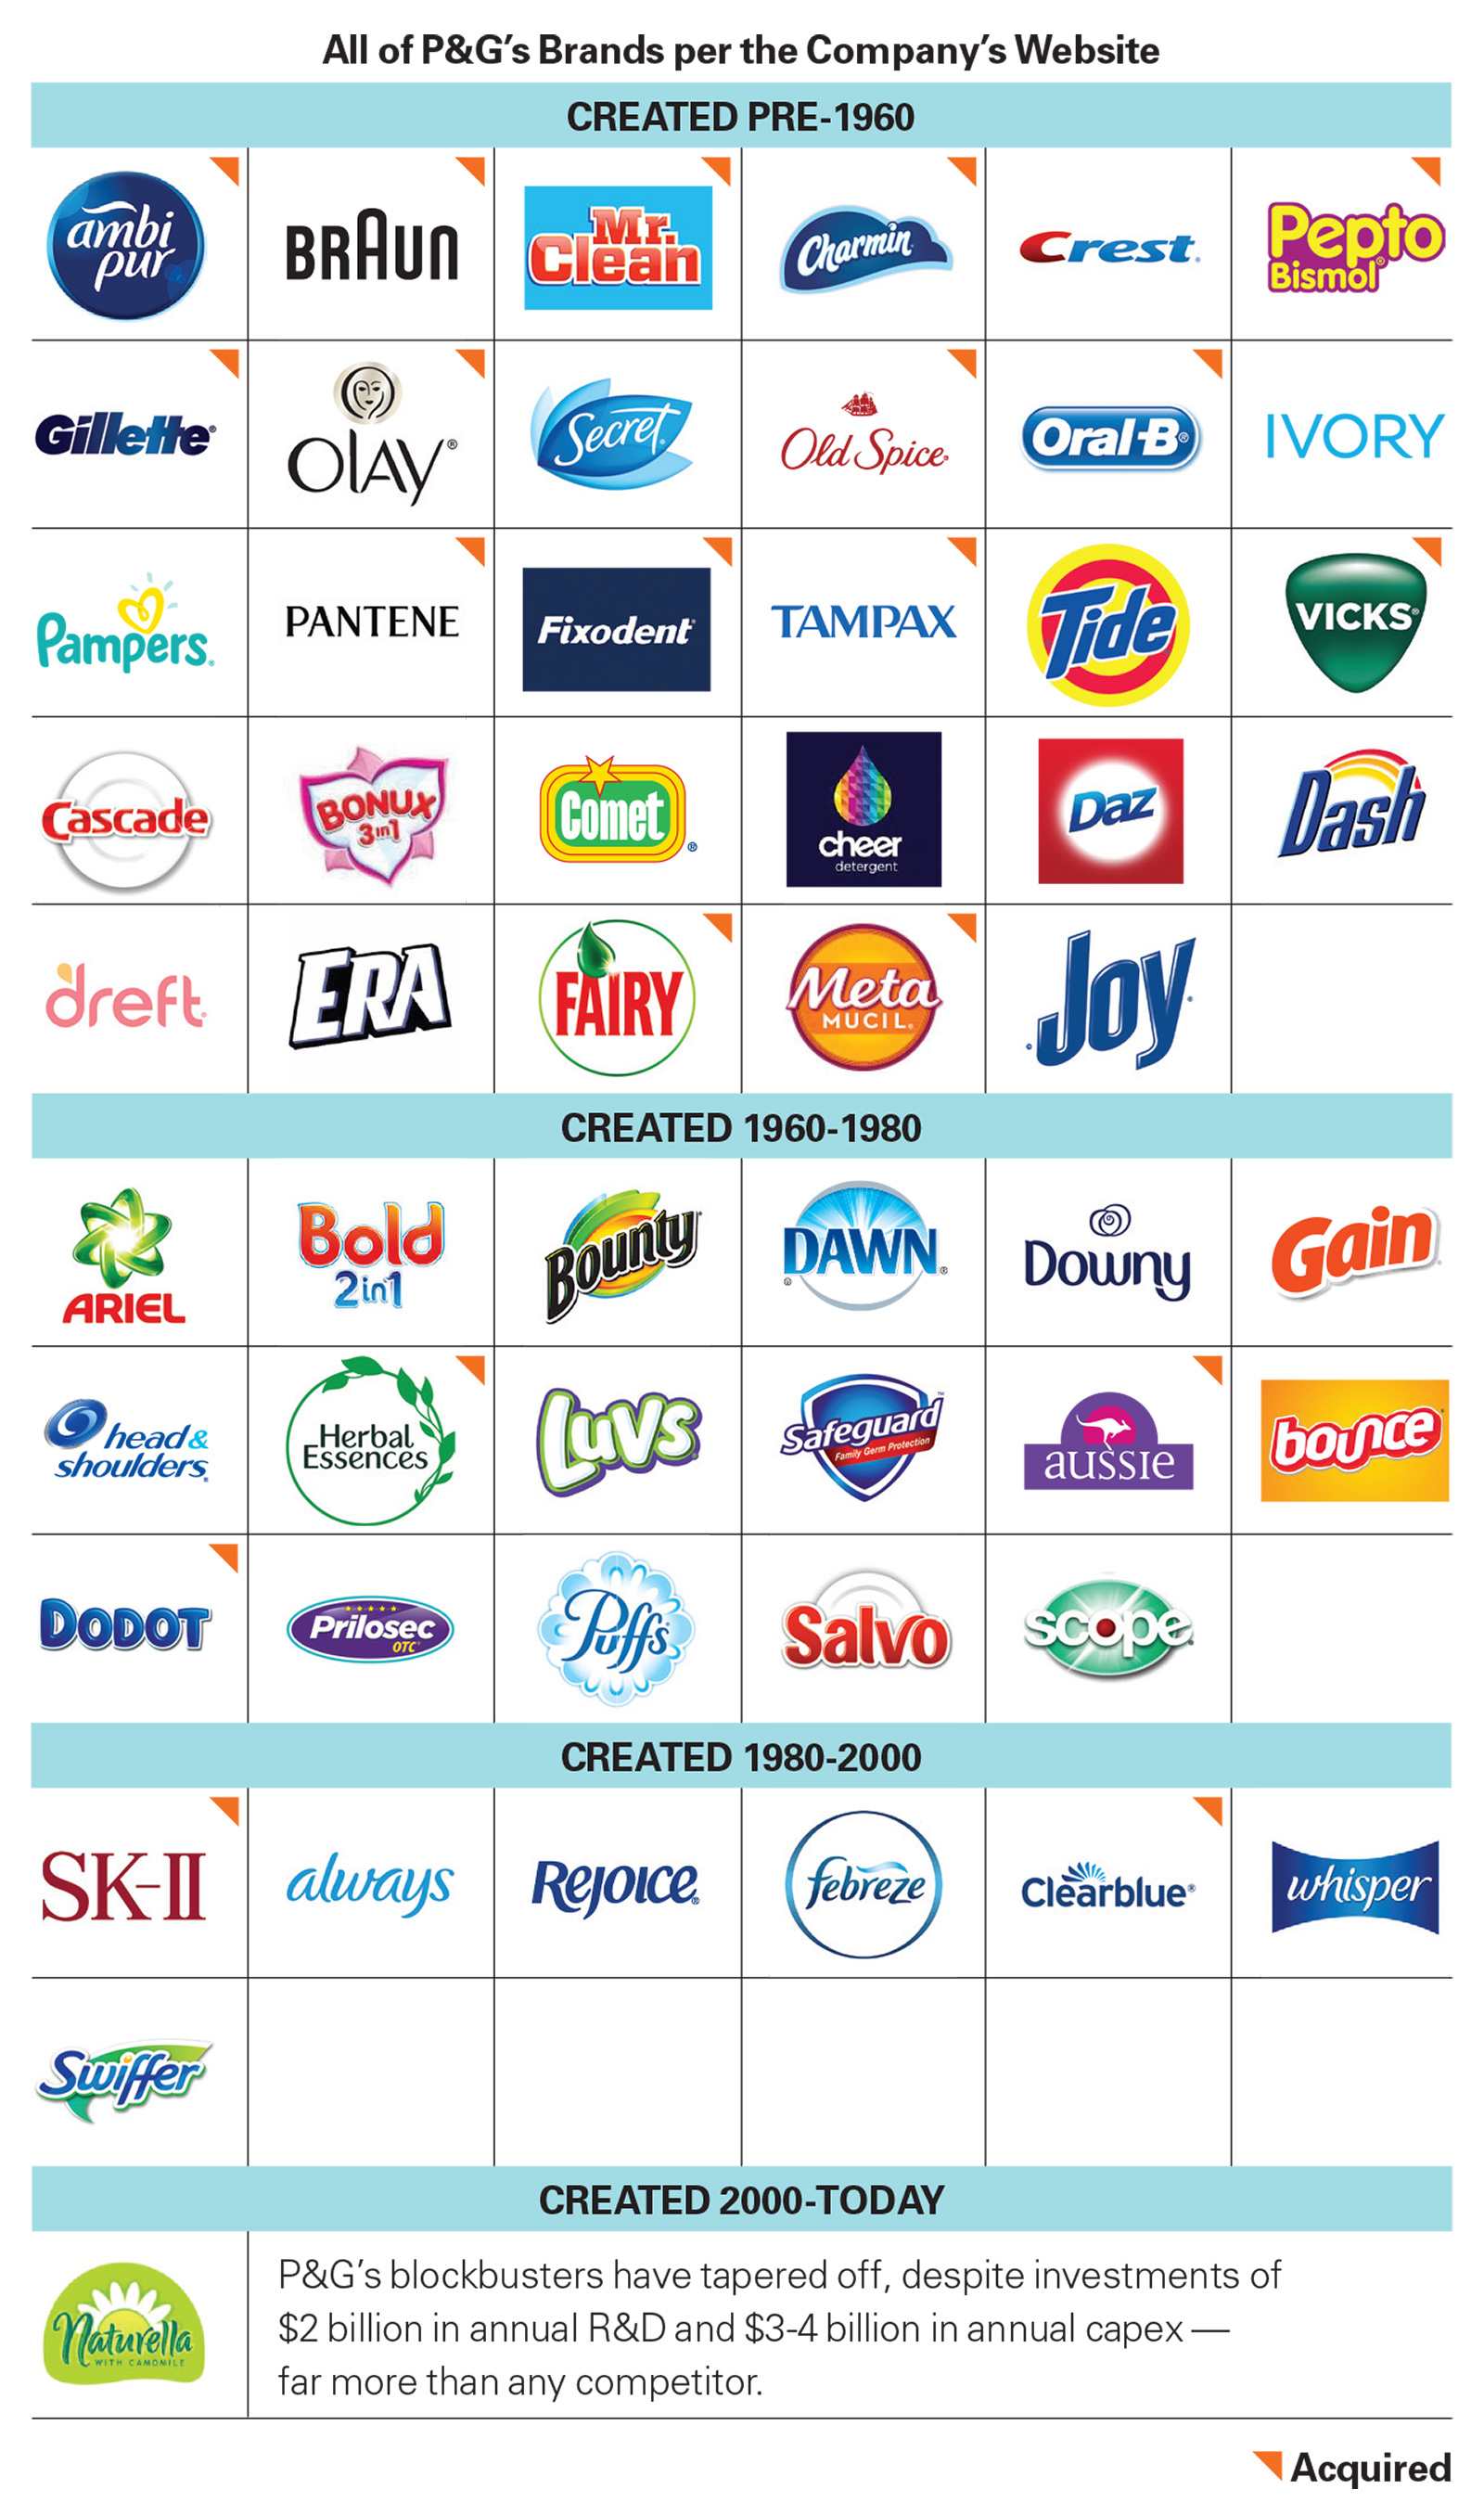 Grid of brand logos under the Proctor & Gamble parent company